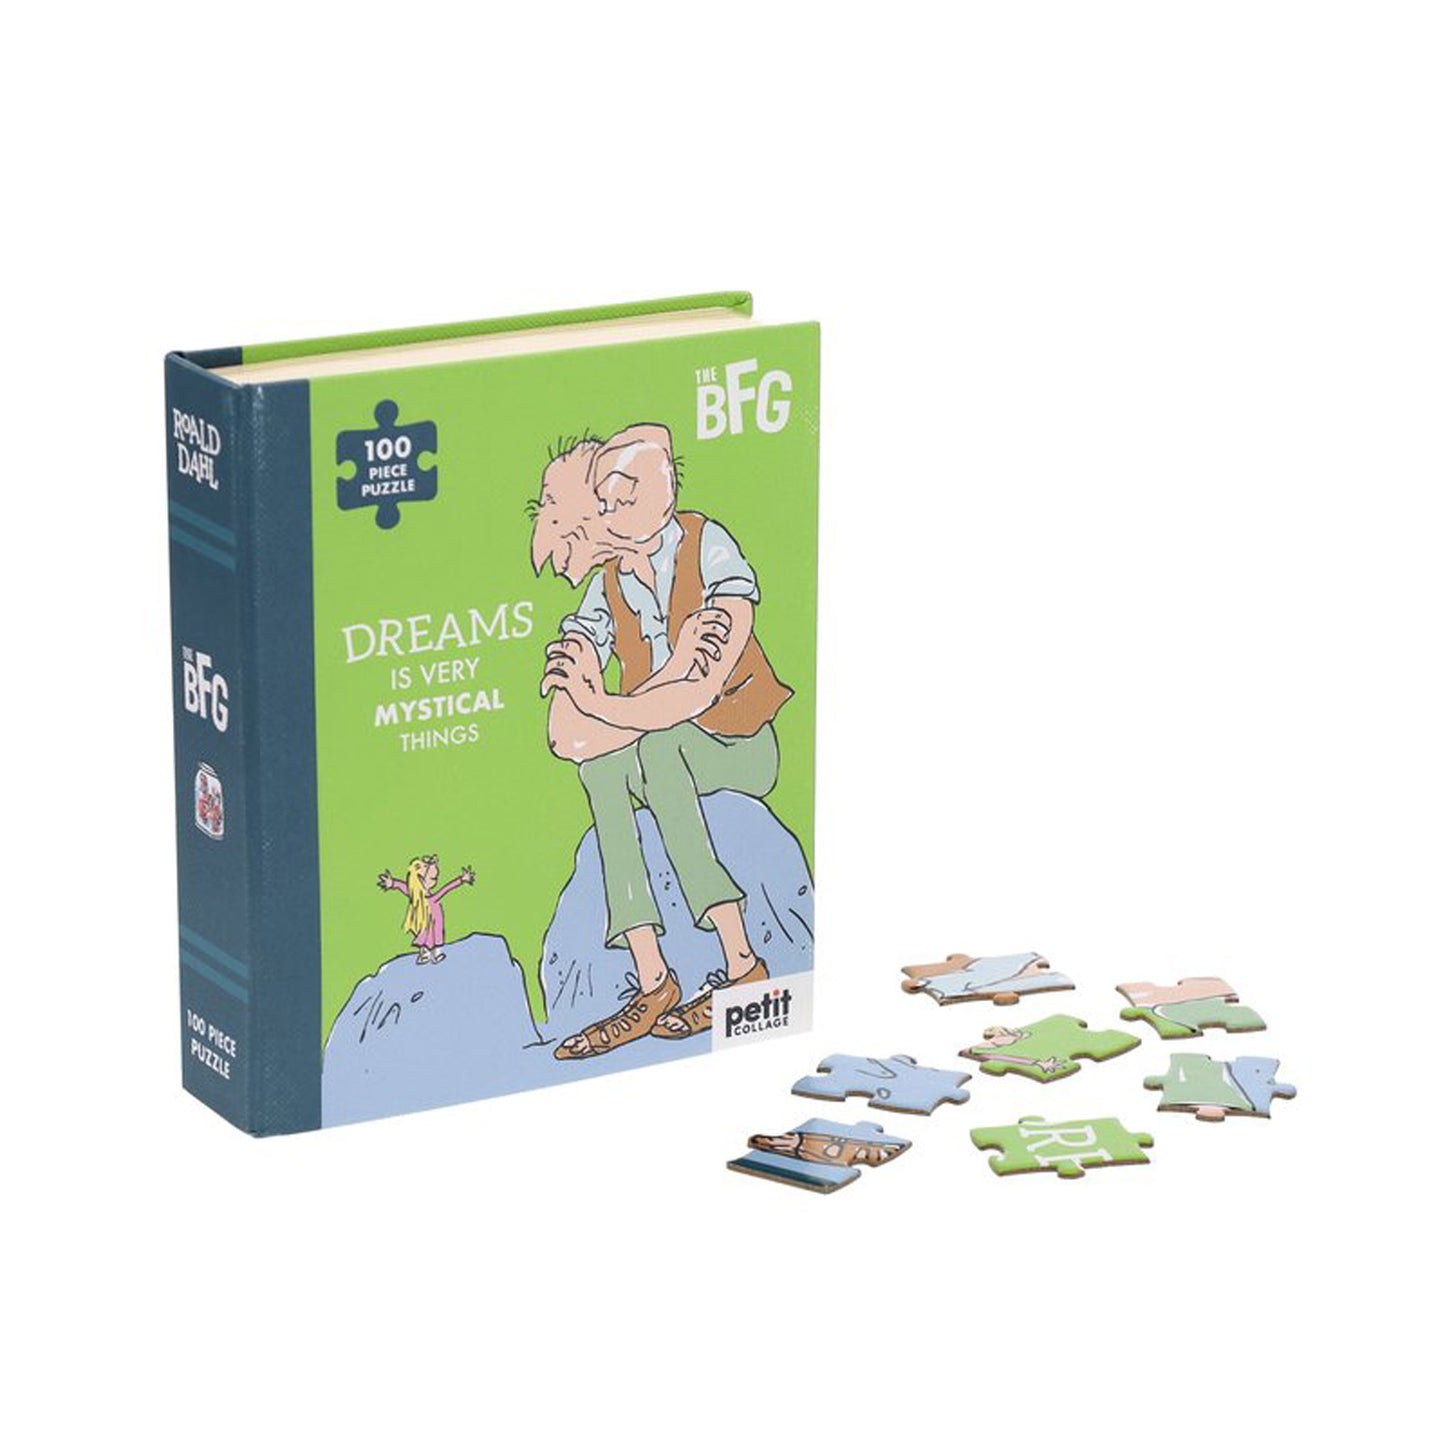 The BFG 100 piece jigsaw puzzle from Roald Dahl and Quentin Blake